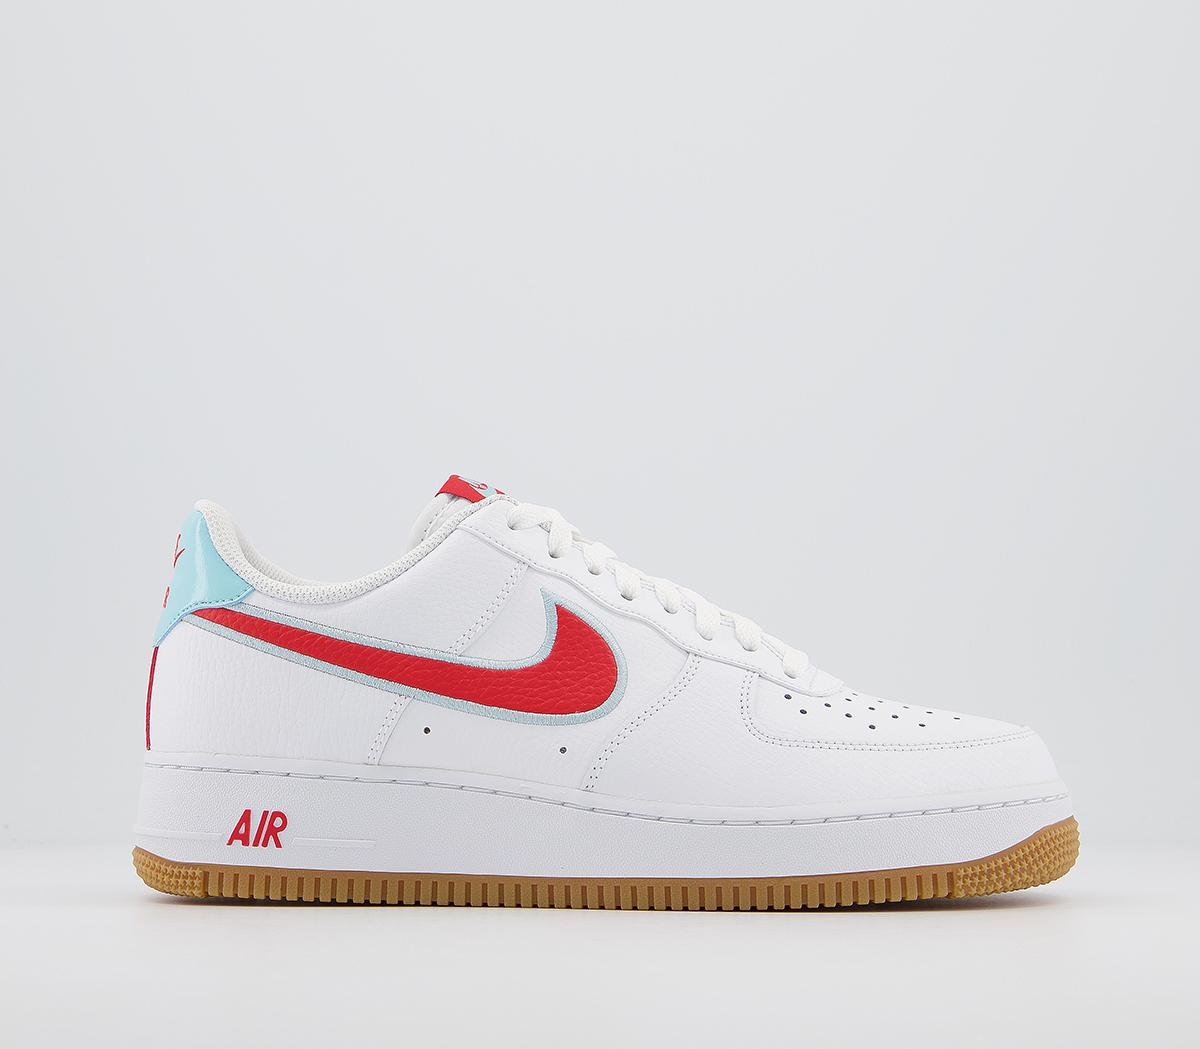 Nike Air Force 1 07 White Chile Red Glacier Ice - His trainers